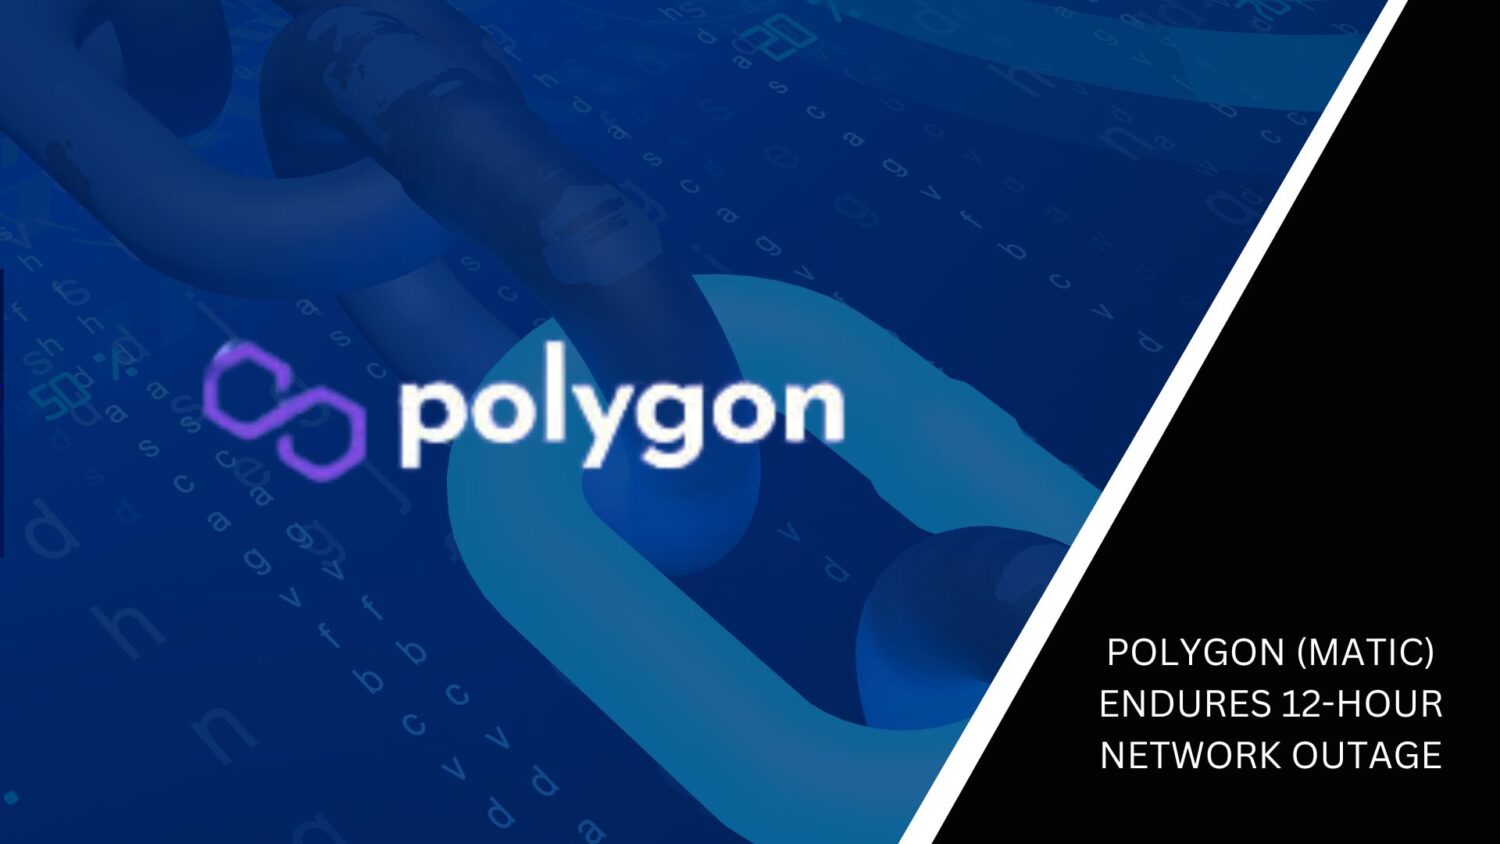 Polygon (Matic) Endures 12-Hour Network Outage